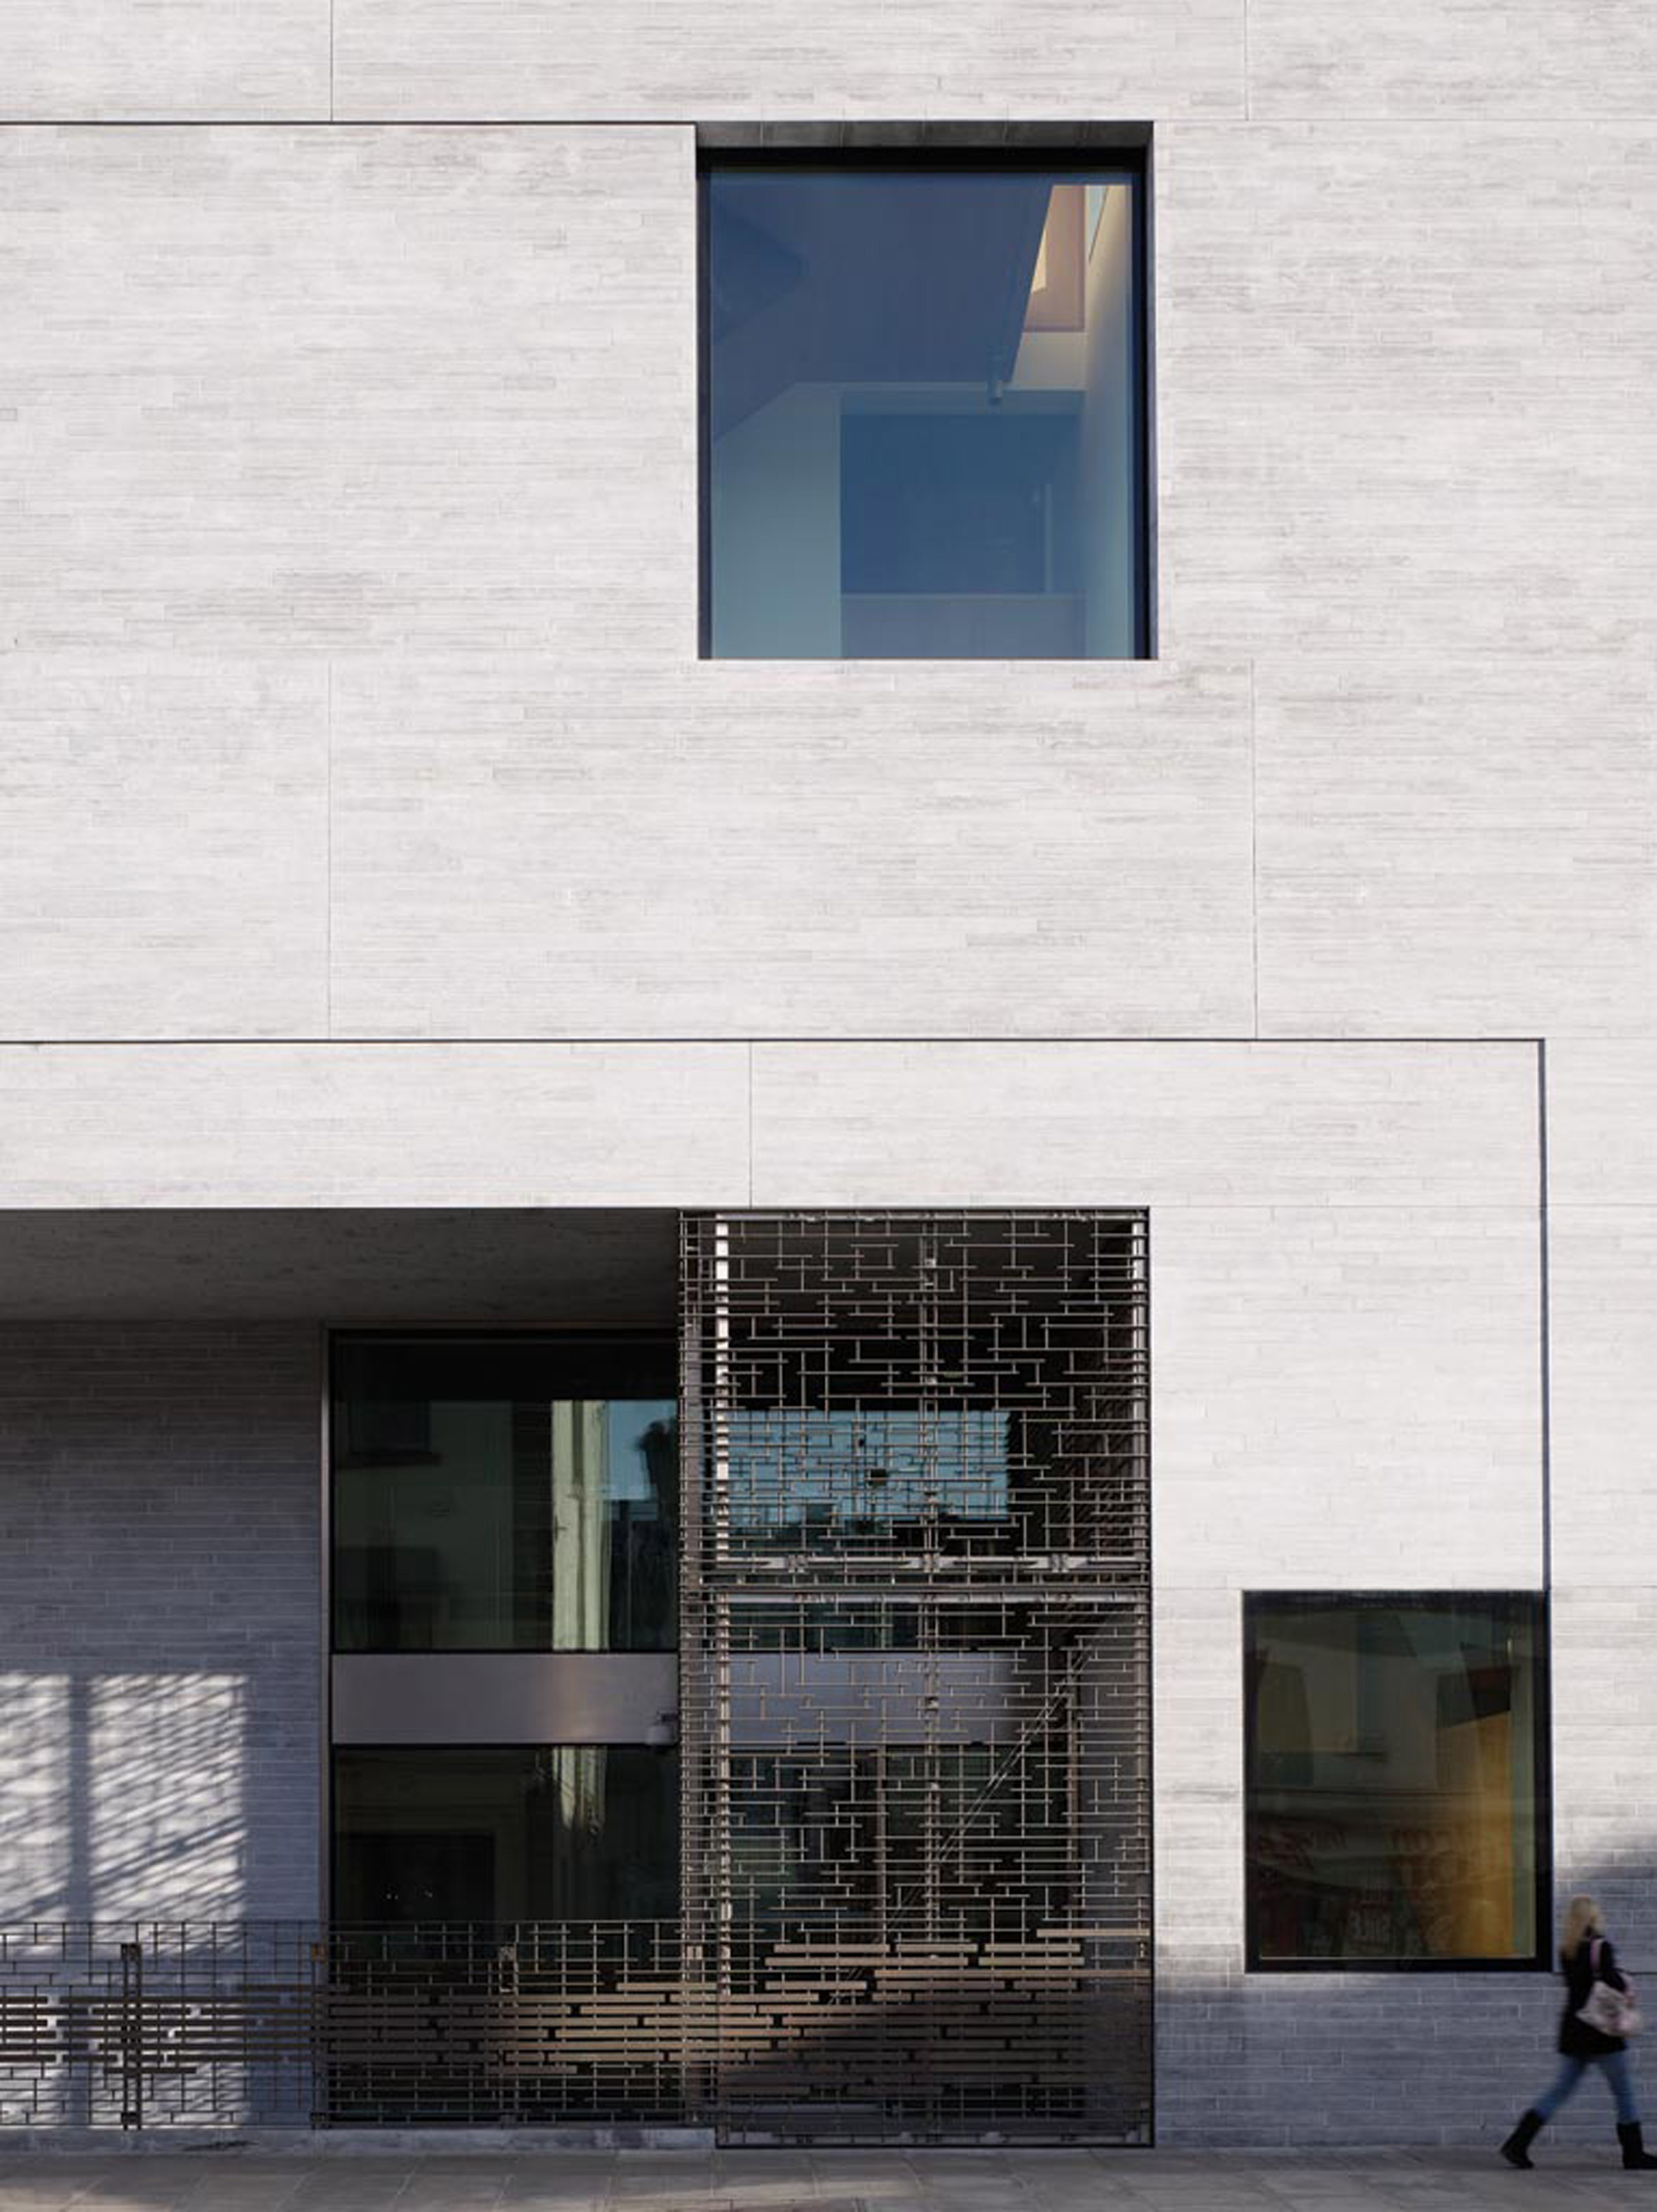 Offices for the Department of Finance; Dublin, Ireland, 2009, by Universita Luigi Bocconi School of Economics; Milan, Italy, 2008, by Grafton Architects